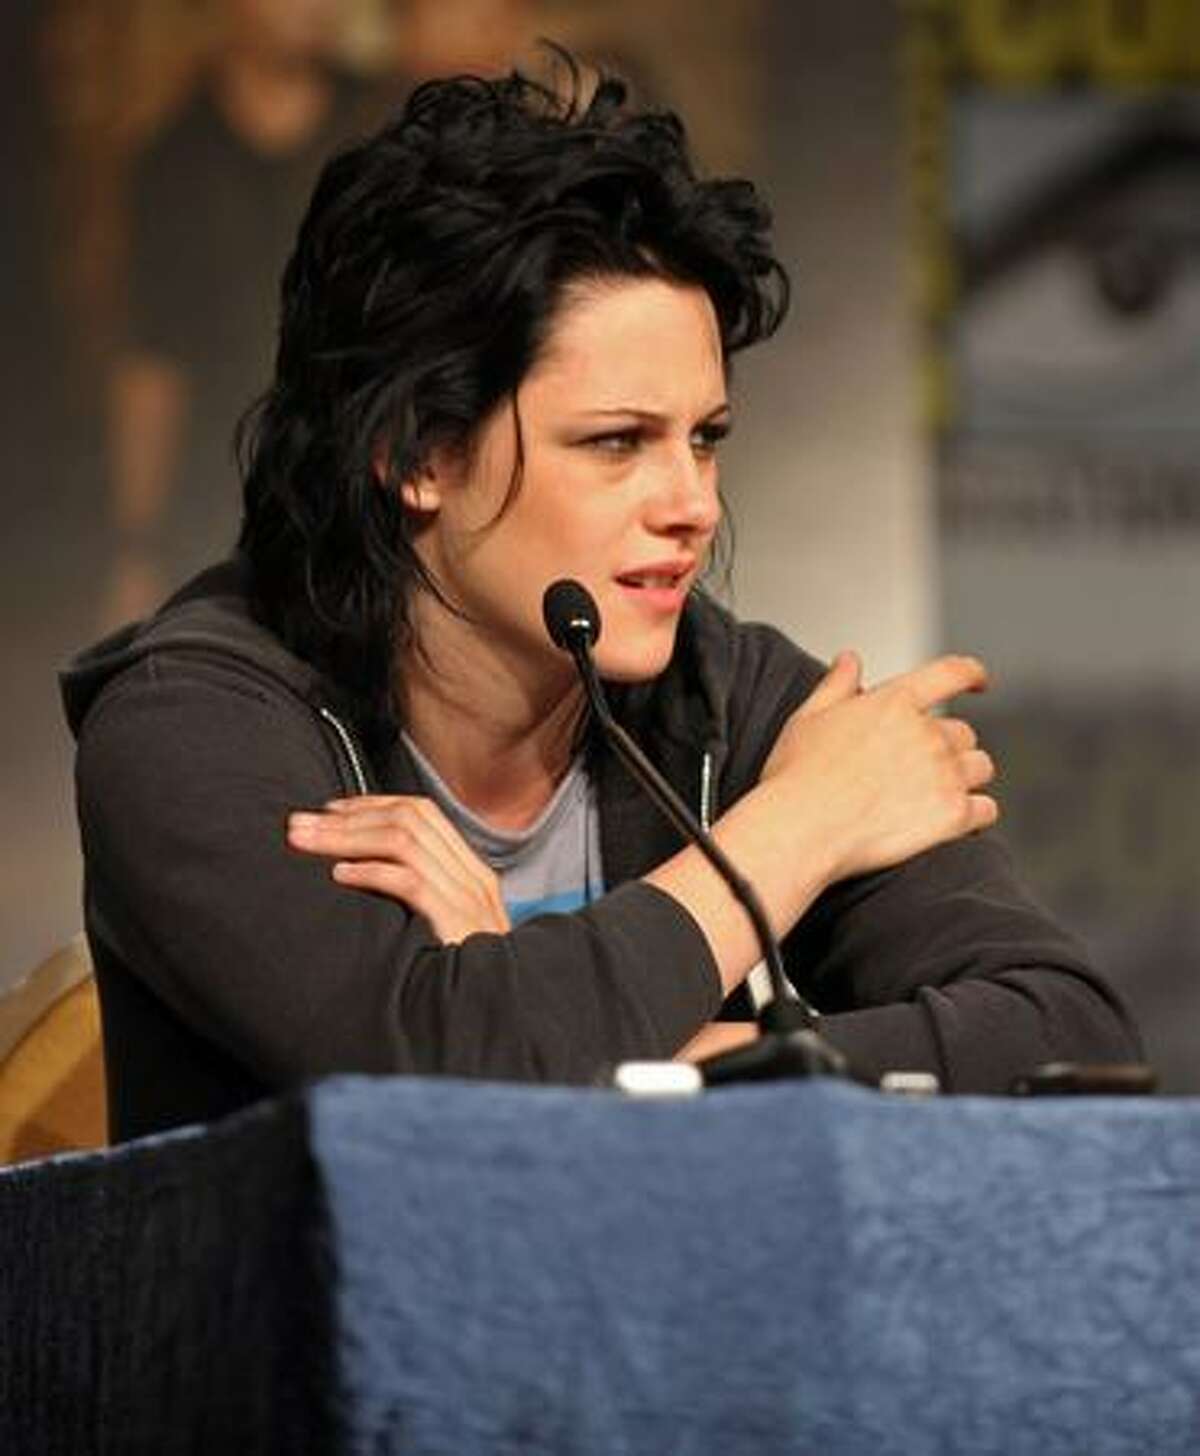 Actress Kristen Stewart speaks at "The Twilight Saga: New Moon" press conference during Comic-Con 2009 held at San Diego Convention Center in San Diego, California.